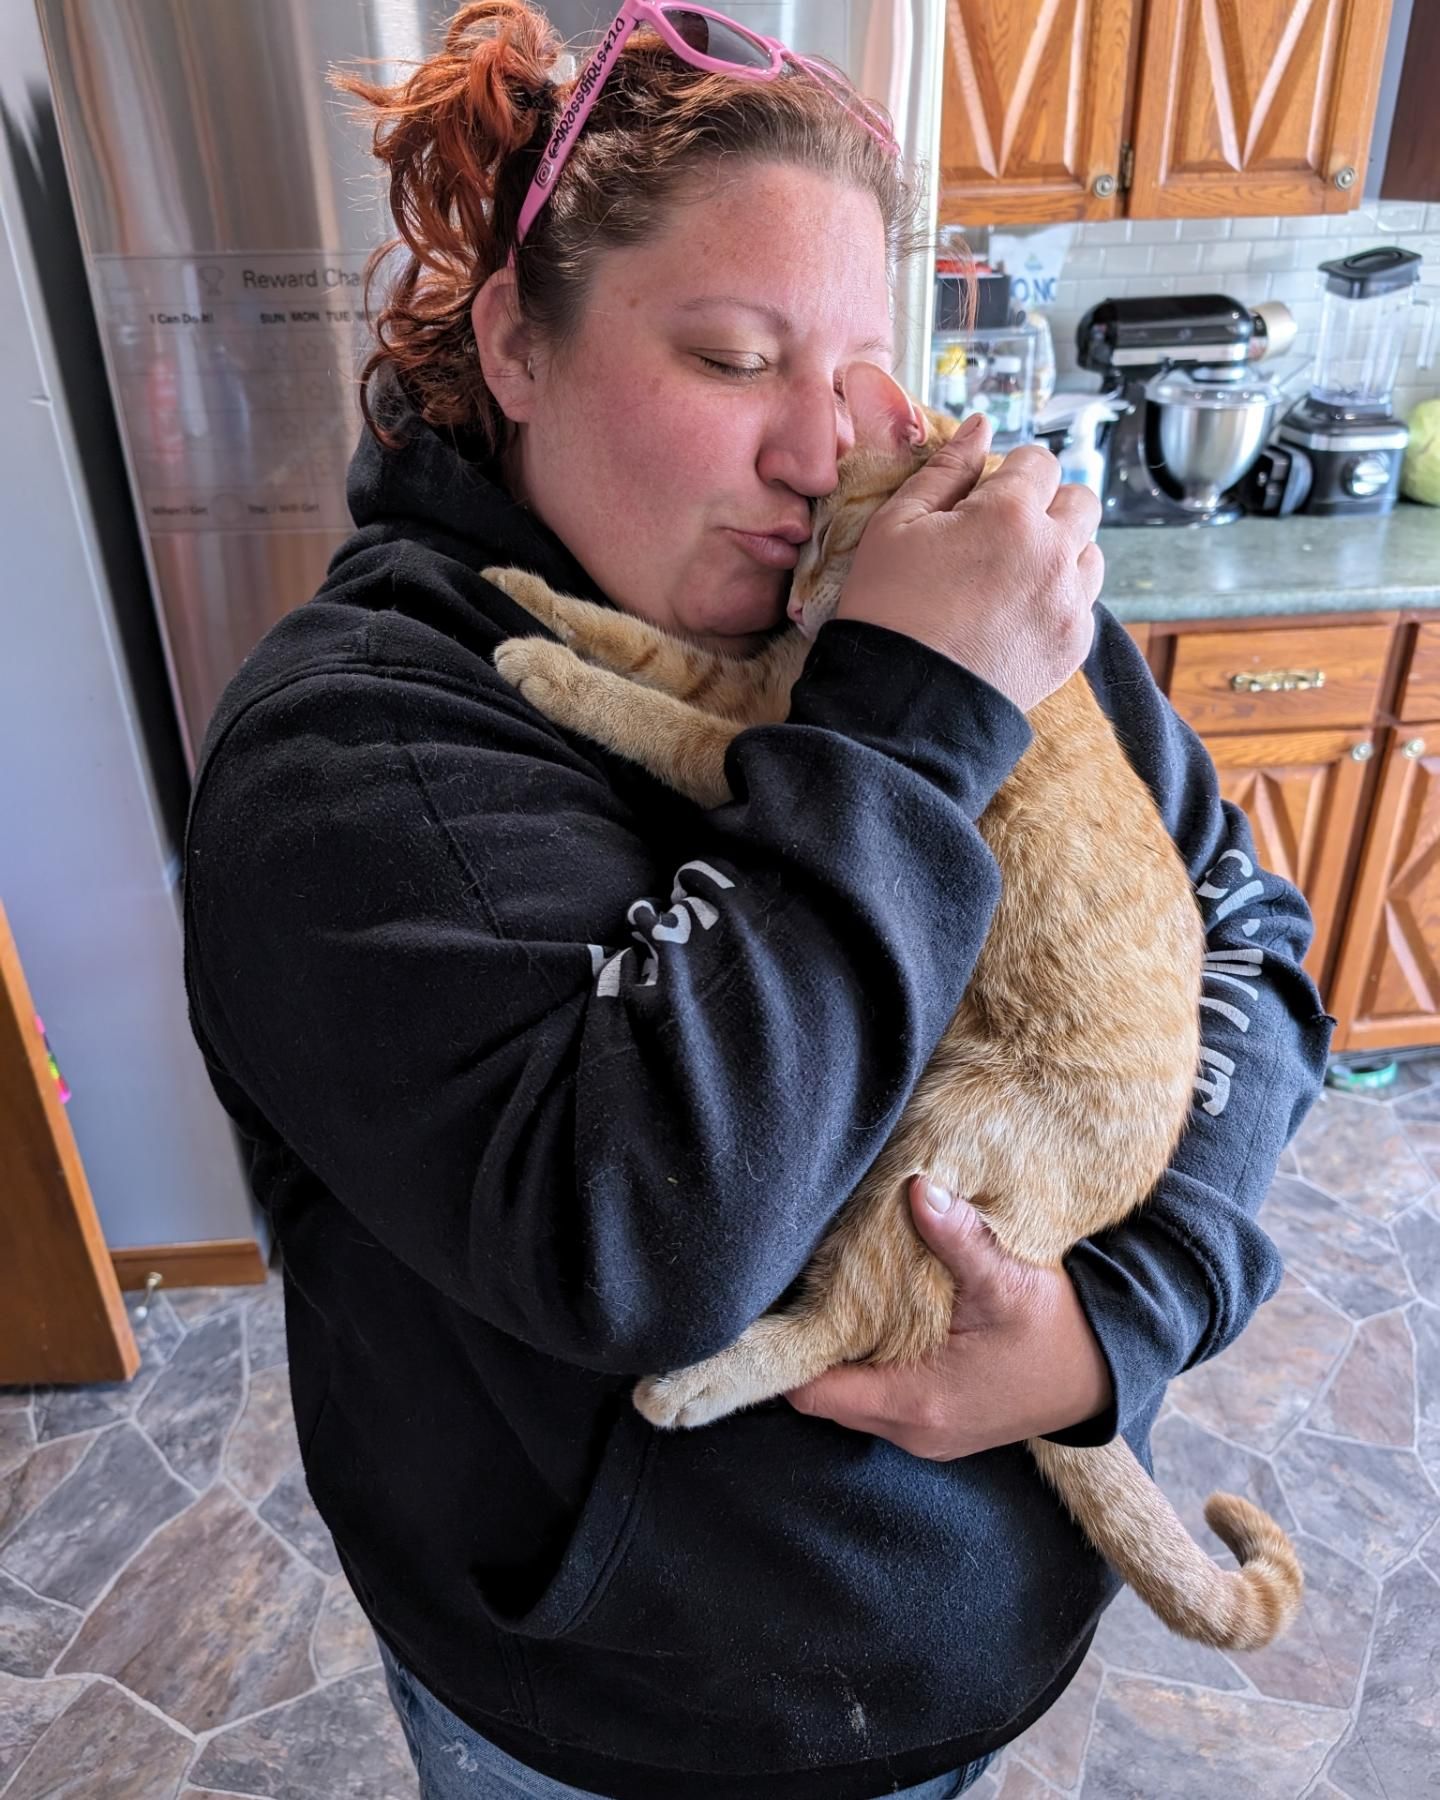 We love clients who have cuddley kitties 😻 
#petfriendly #petservices #animallovers #stalkers #cutekitties #catsofinstagram #socute #beyourownboss #businesswomen #thelocalladies #supportsmallbusiness #supportlocal #smallbusiness